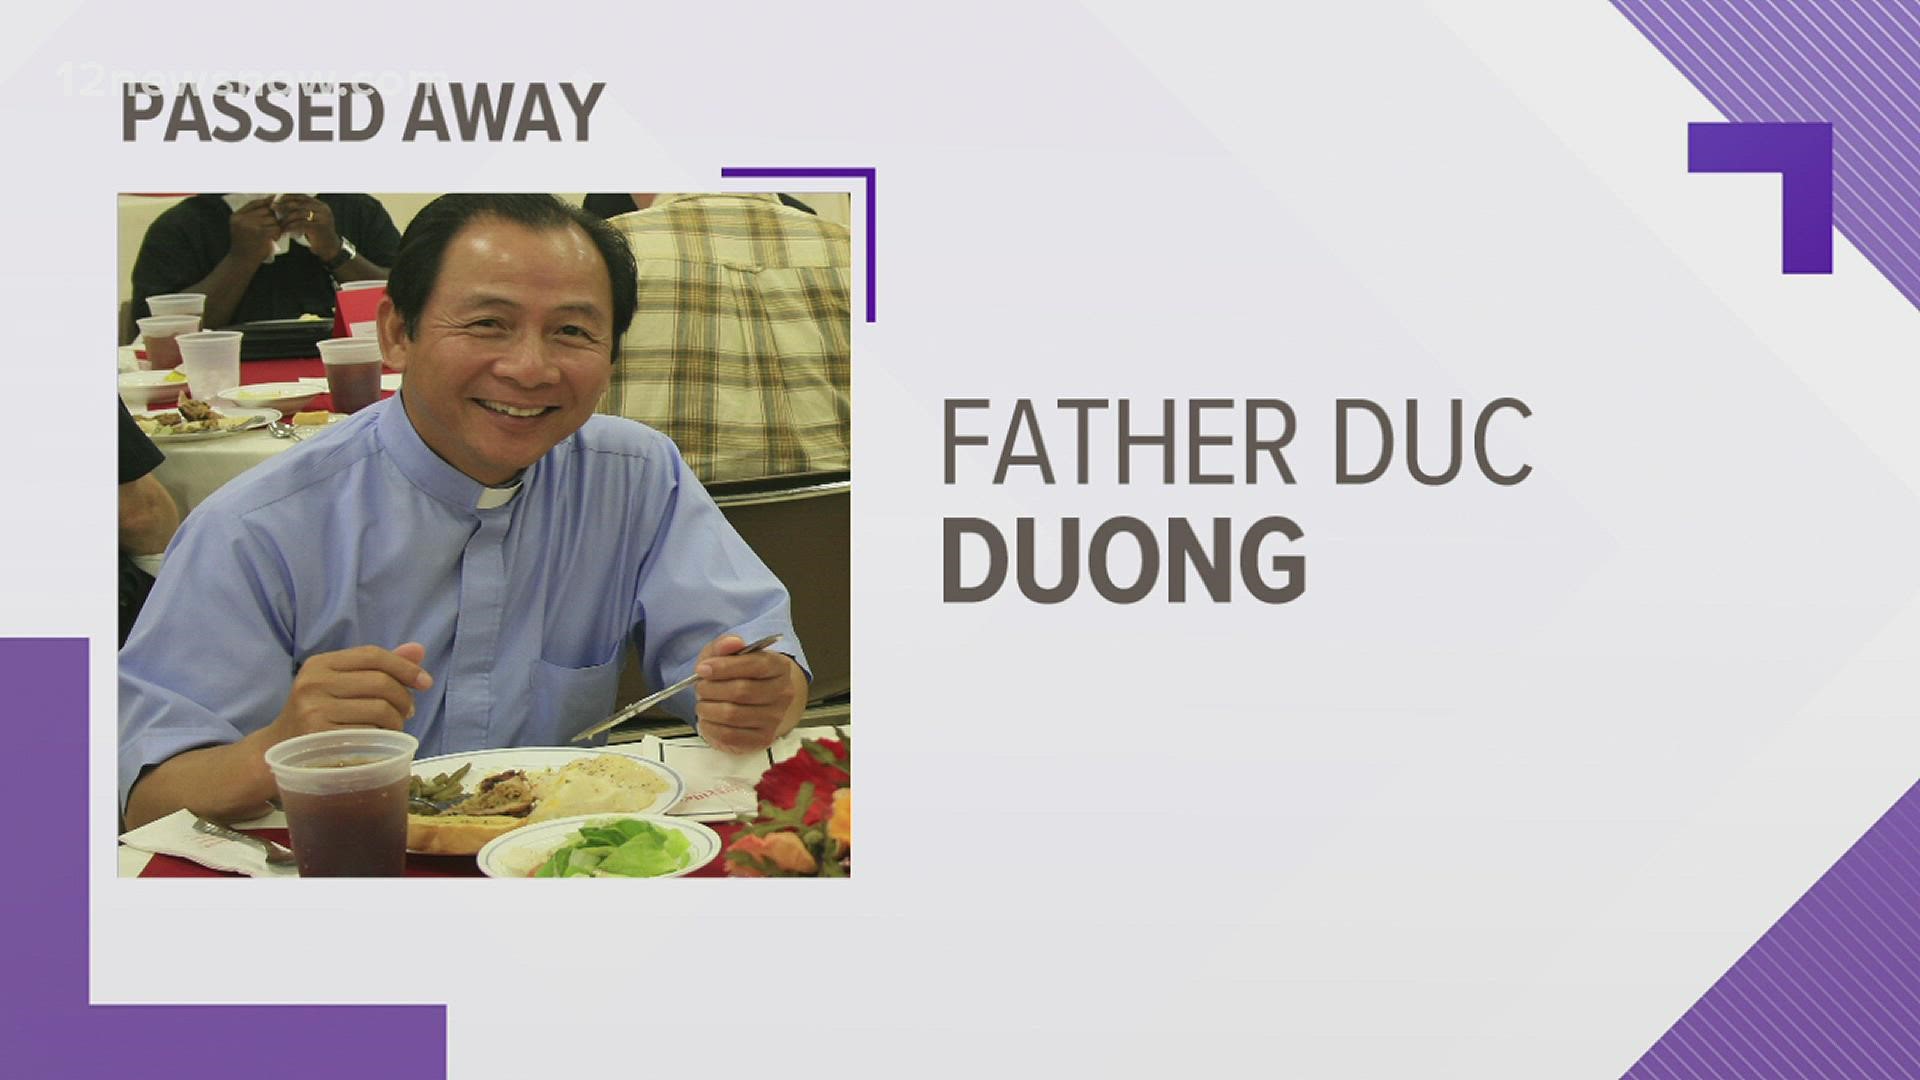 Father Duc Duong died on Saturday, November 6. He was 63 years old.